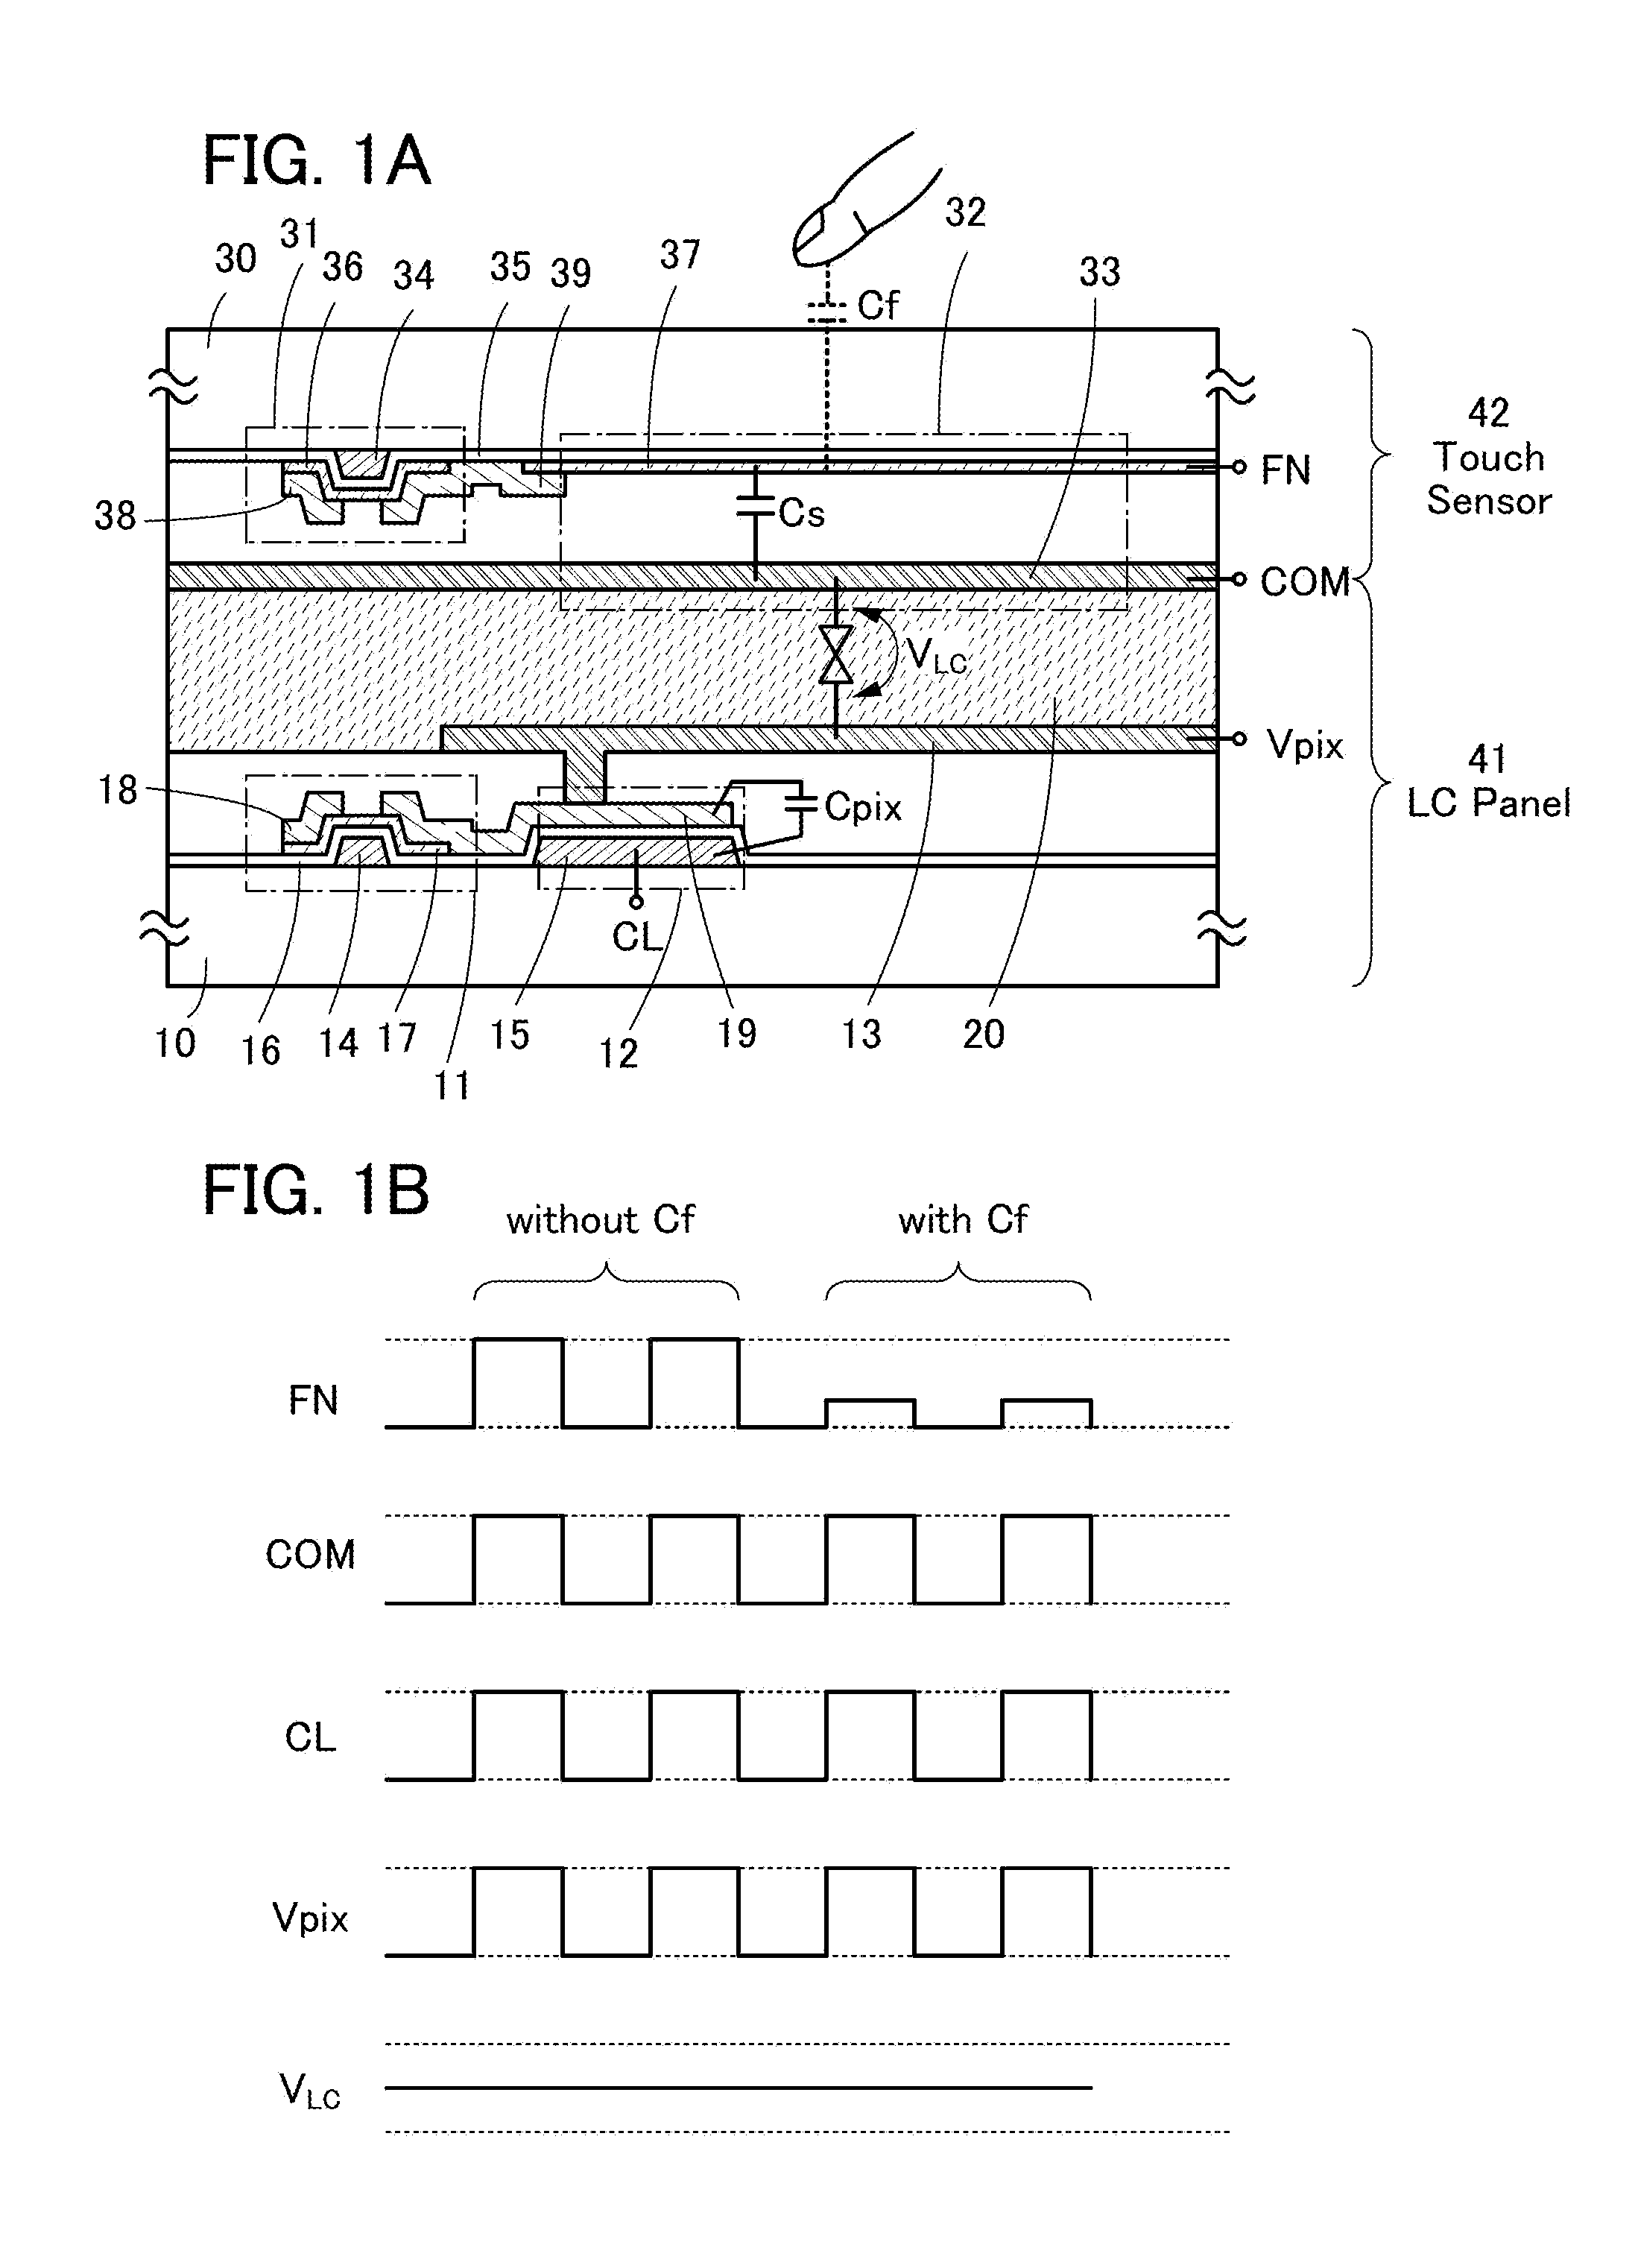 Display device, display module, and electronic device